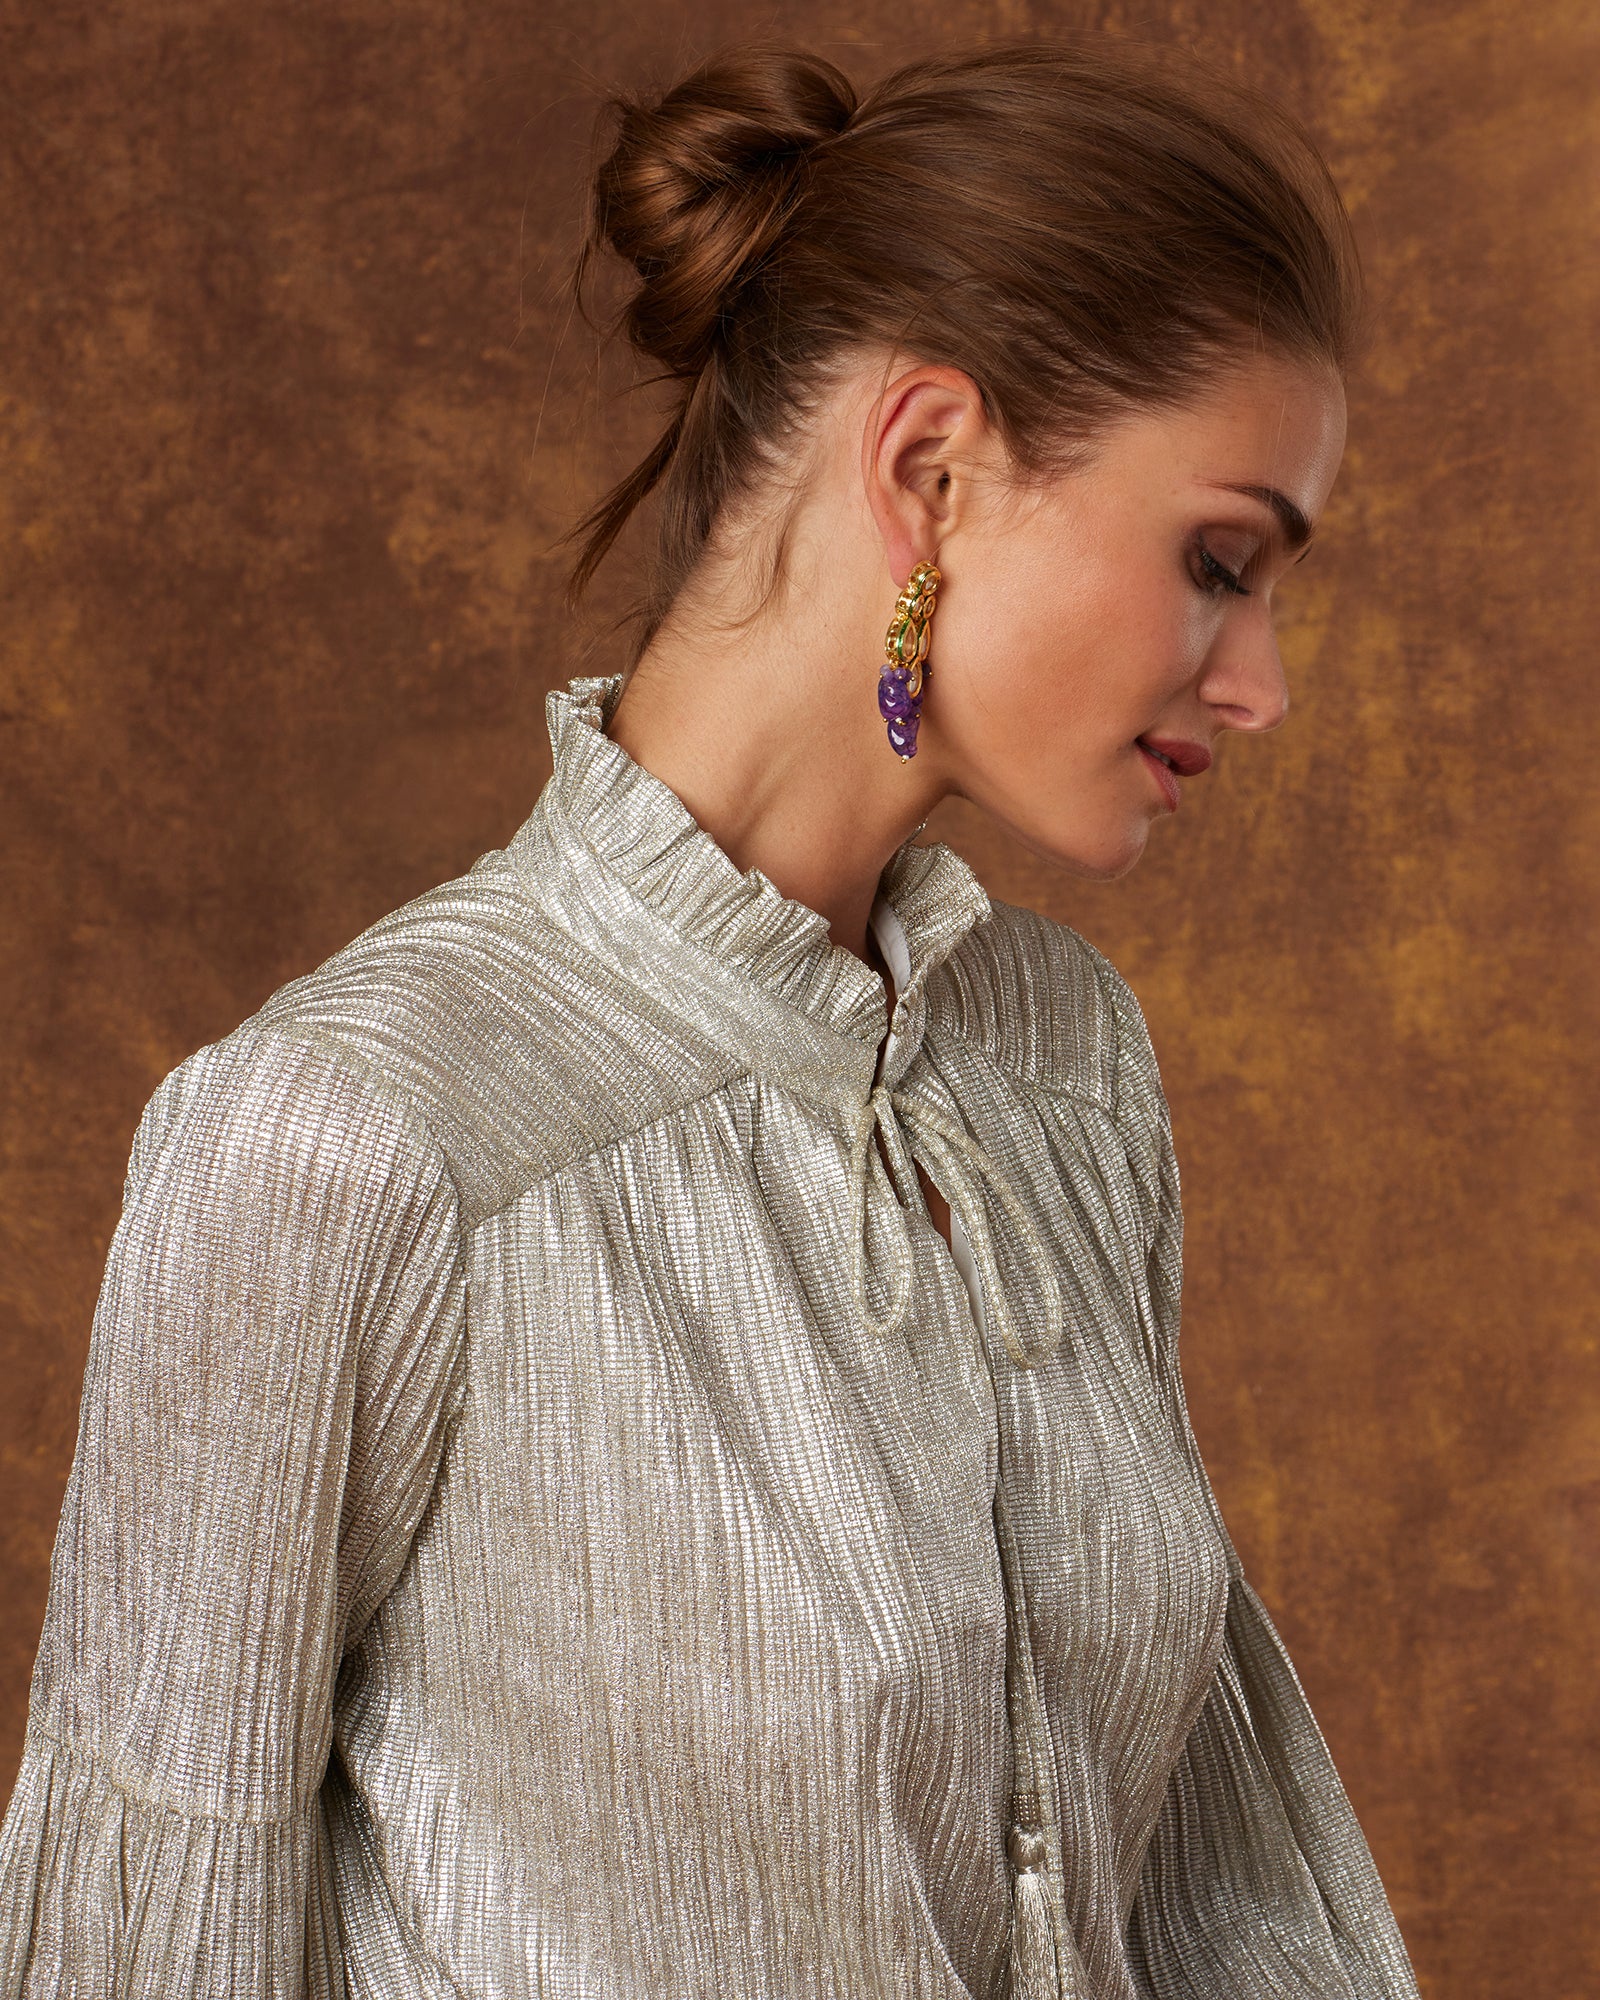 Ophelia Poet Blouse in Silver Cascade-Closeup With Necktie Closed